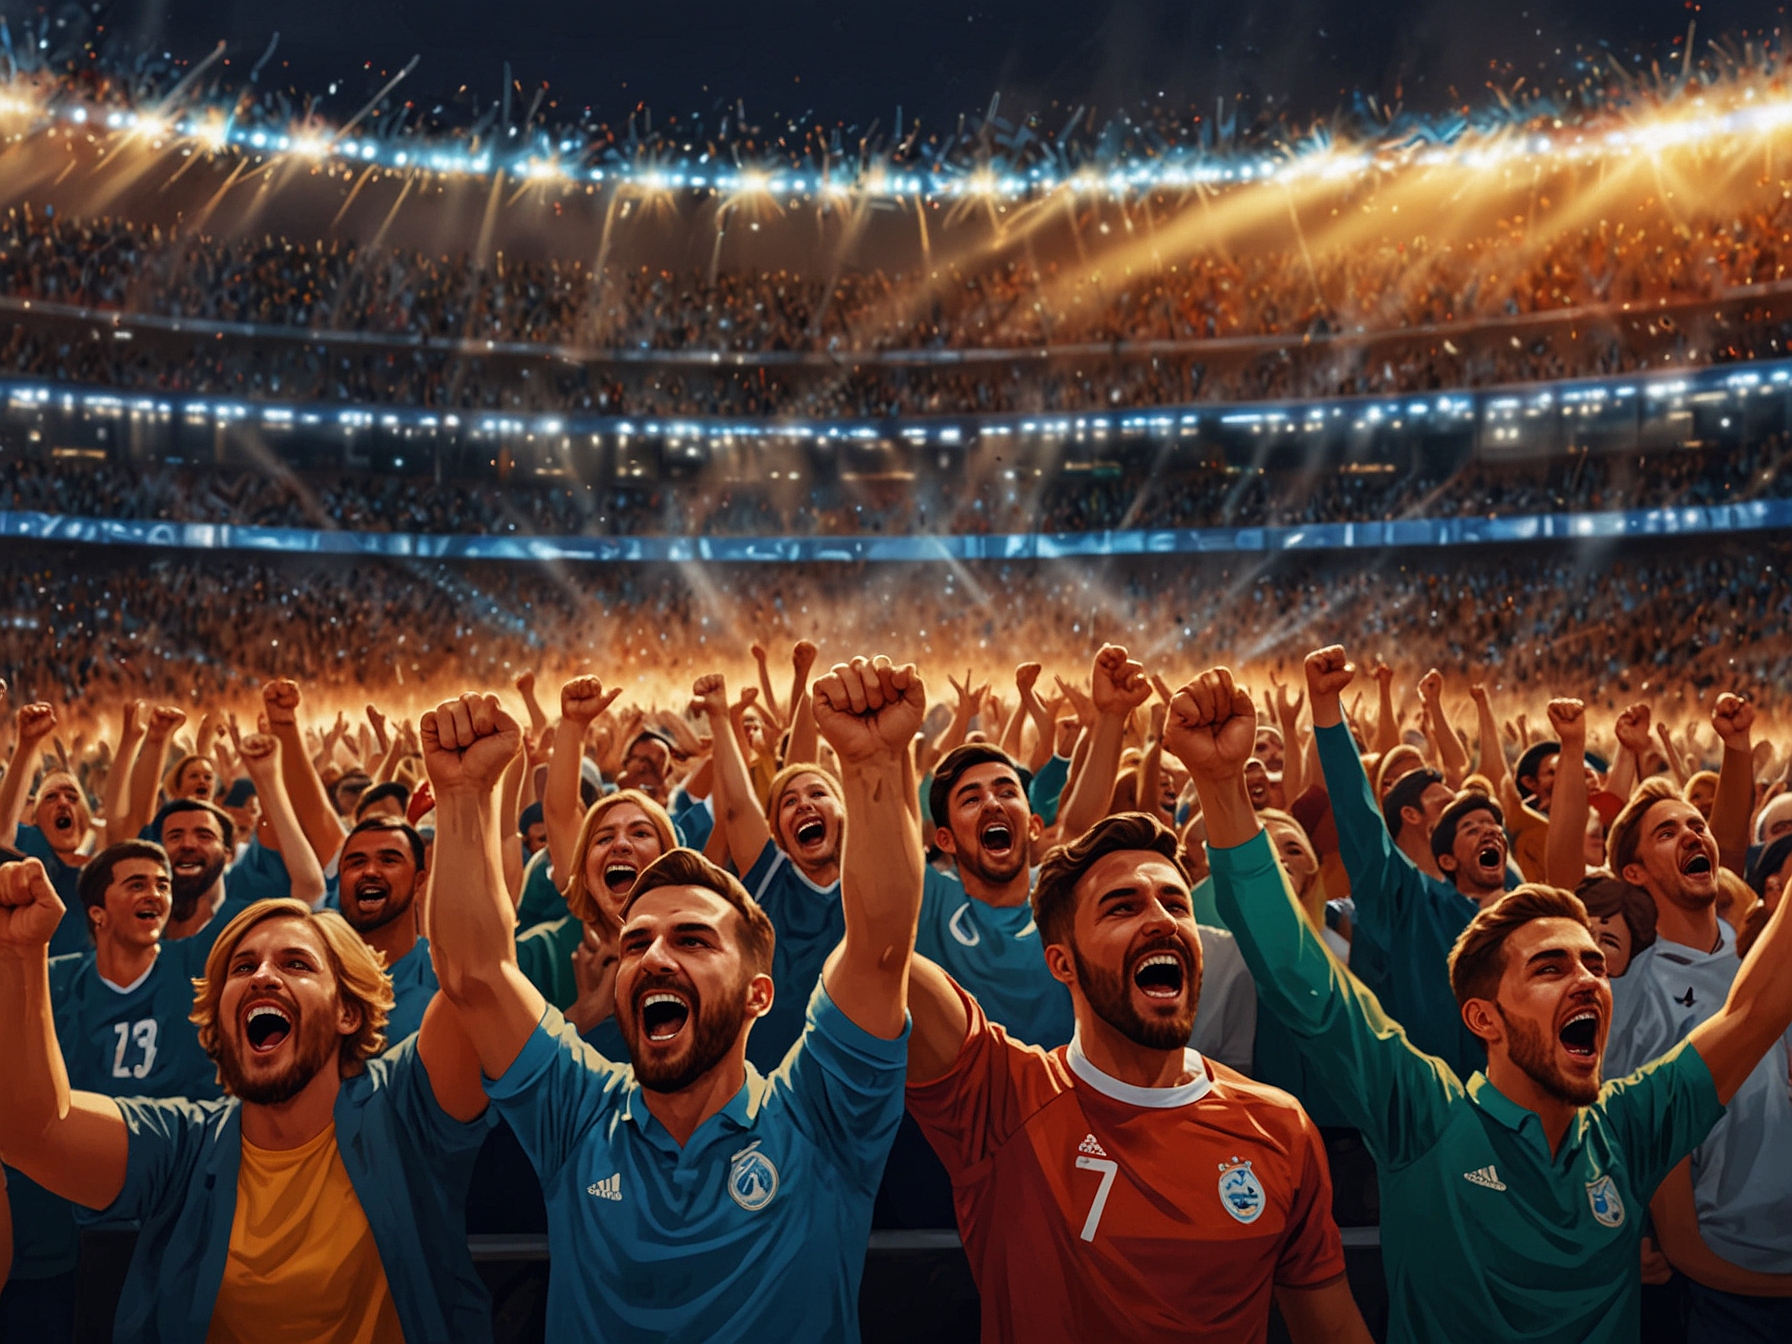 A vibrant scene showing fans cheering in a packed football stadium, capturing the electrifying atmosphere of a live Euro 2024 match.